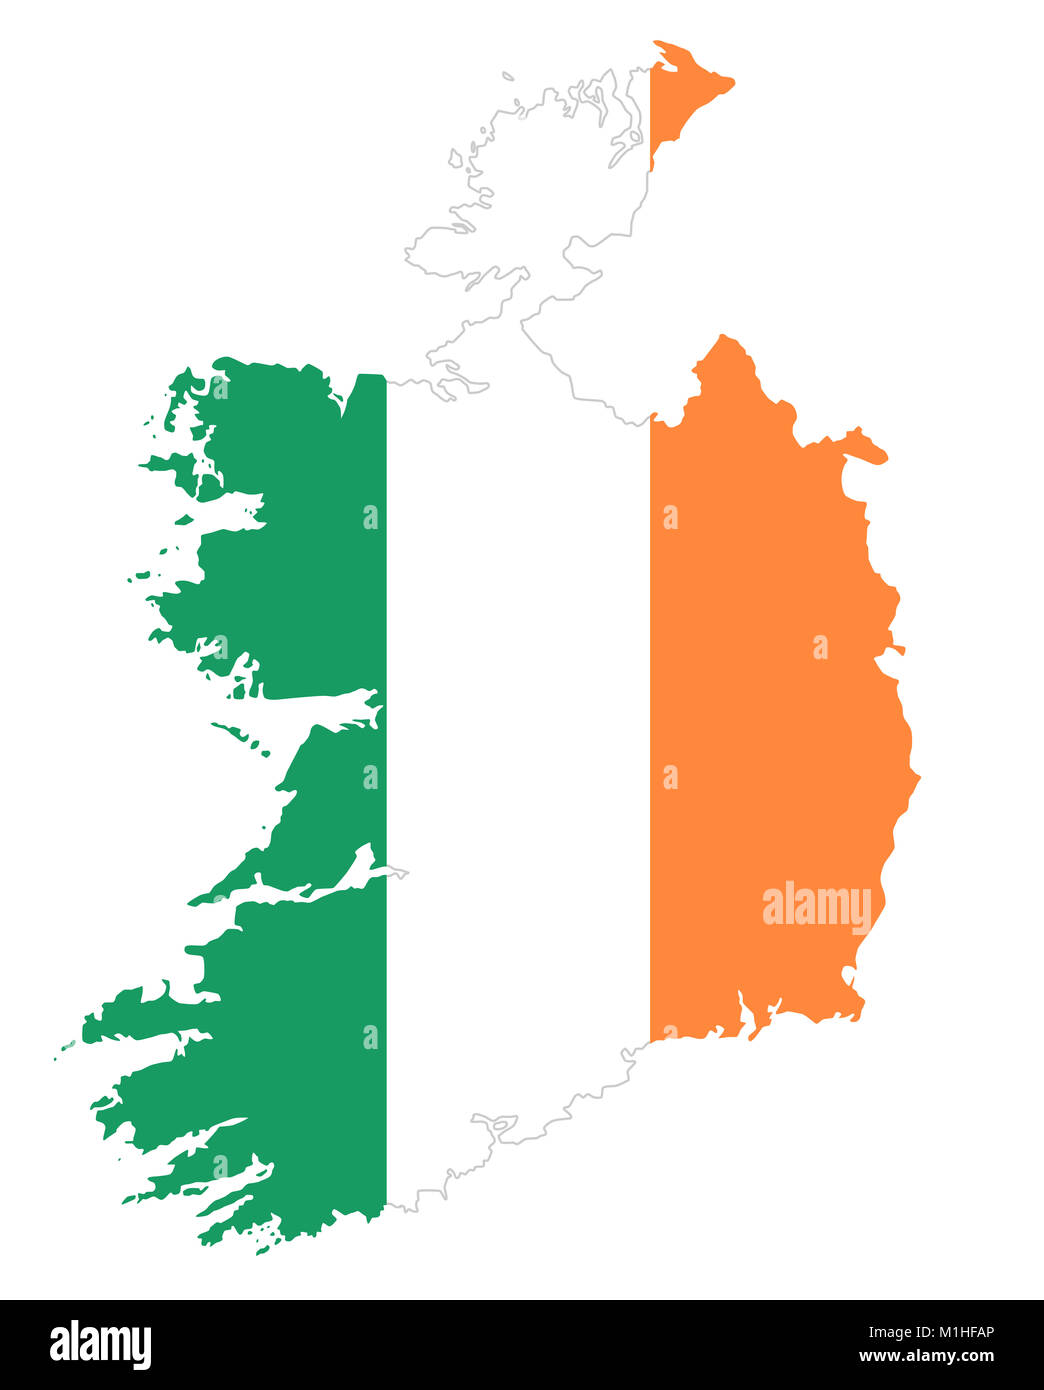 Republic of Ireland flag in country silhouette. Landmass and borders as outline, within the banner of the nation in colors green, white and orange. Stock Photo